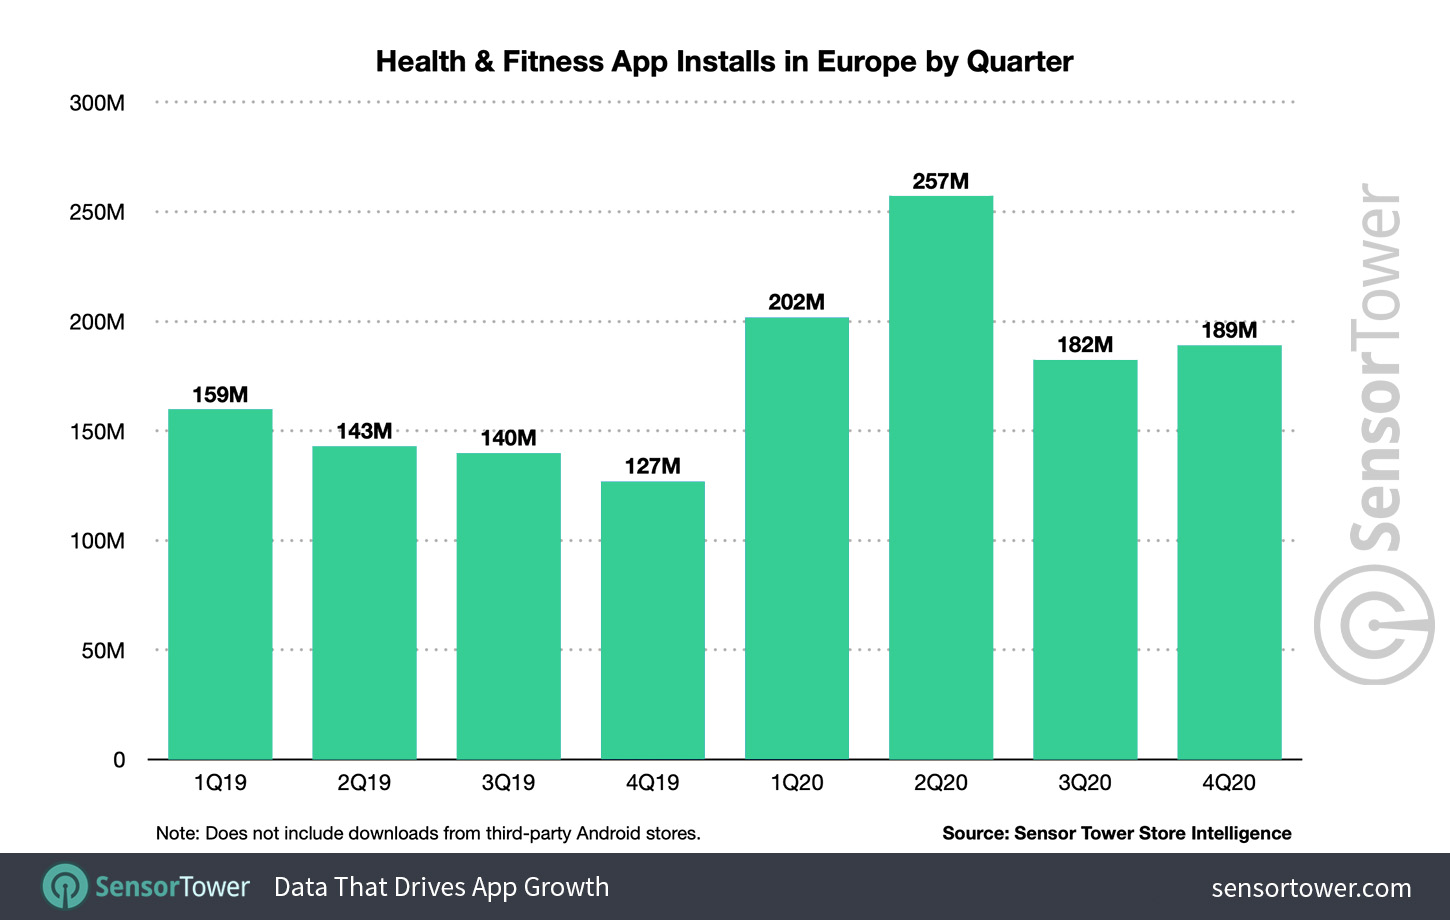 Health & Fitness App Installs in Europe by Quarter